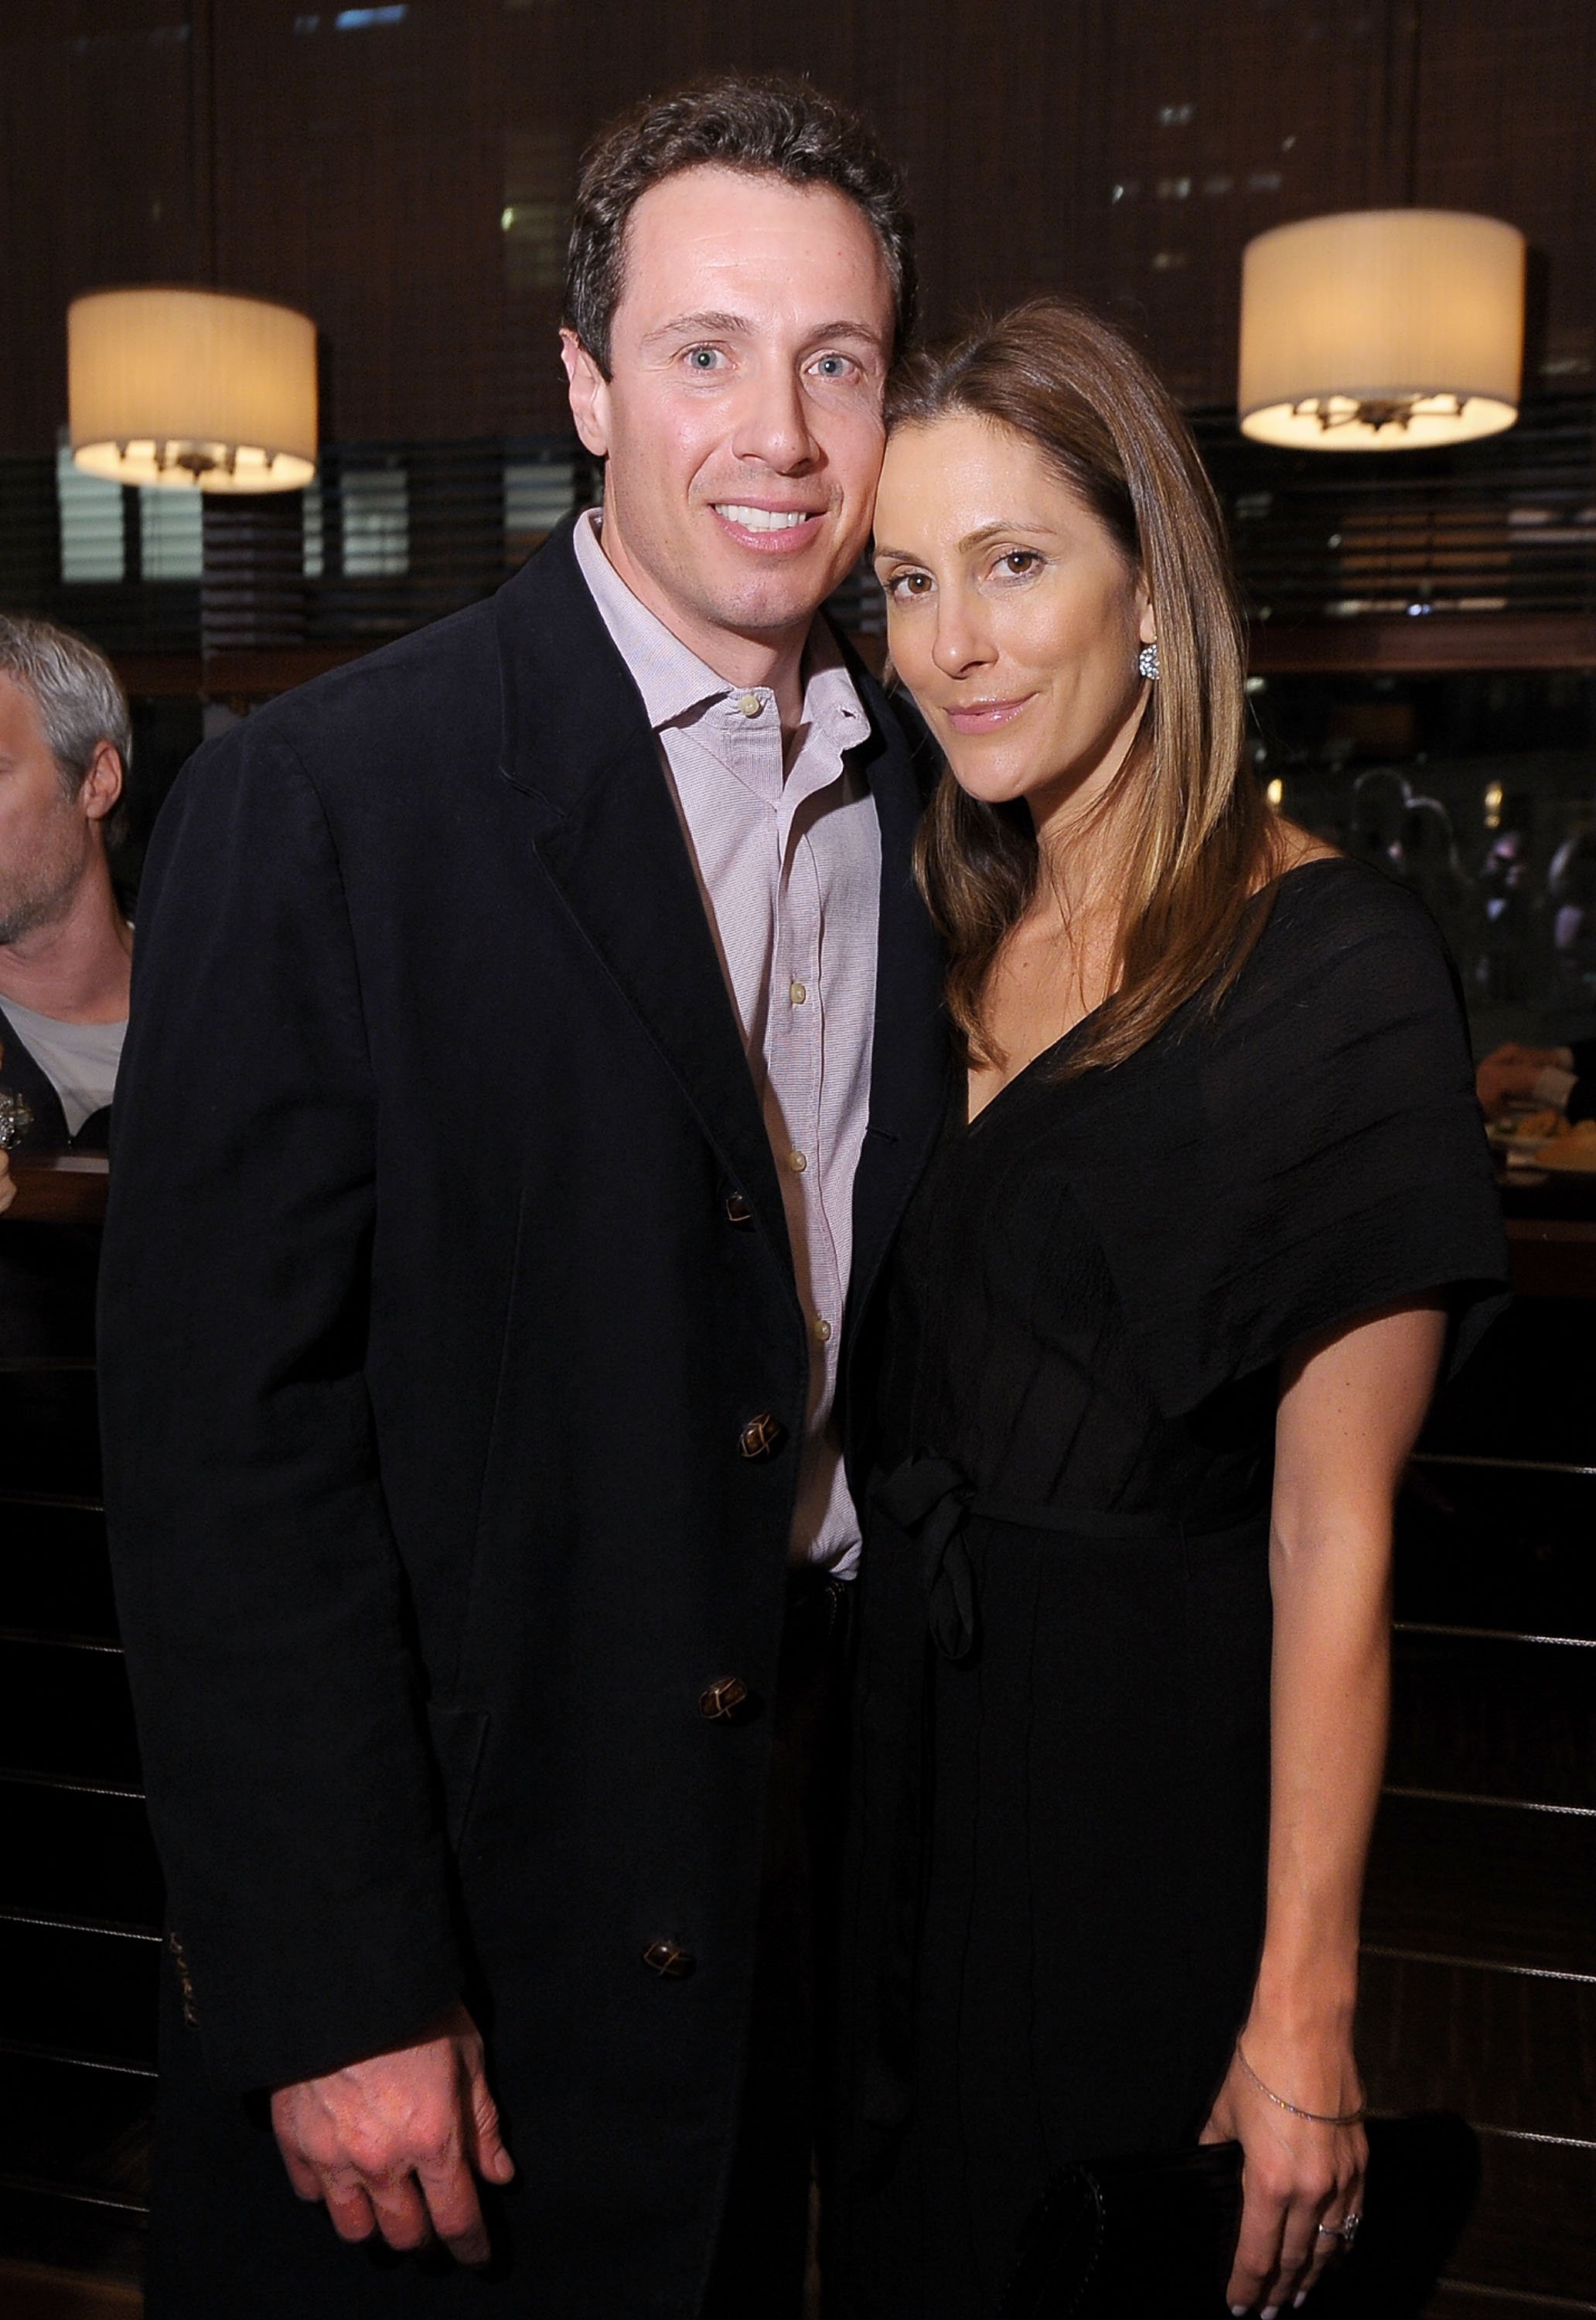 Chris Cuomo and wife Cristina Greeven Cuomo attend the screening of "His Way" on March 30, 2011, in New York City. | Source: Getty Images.